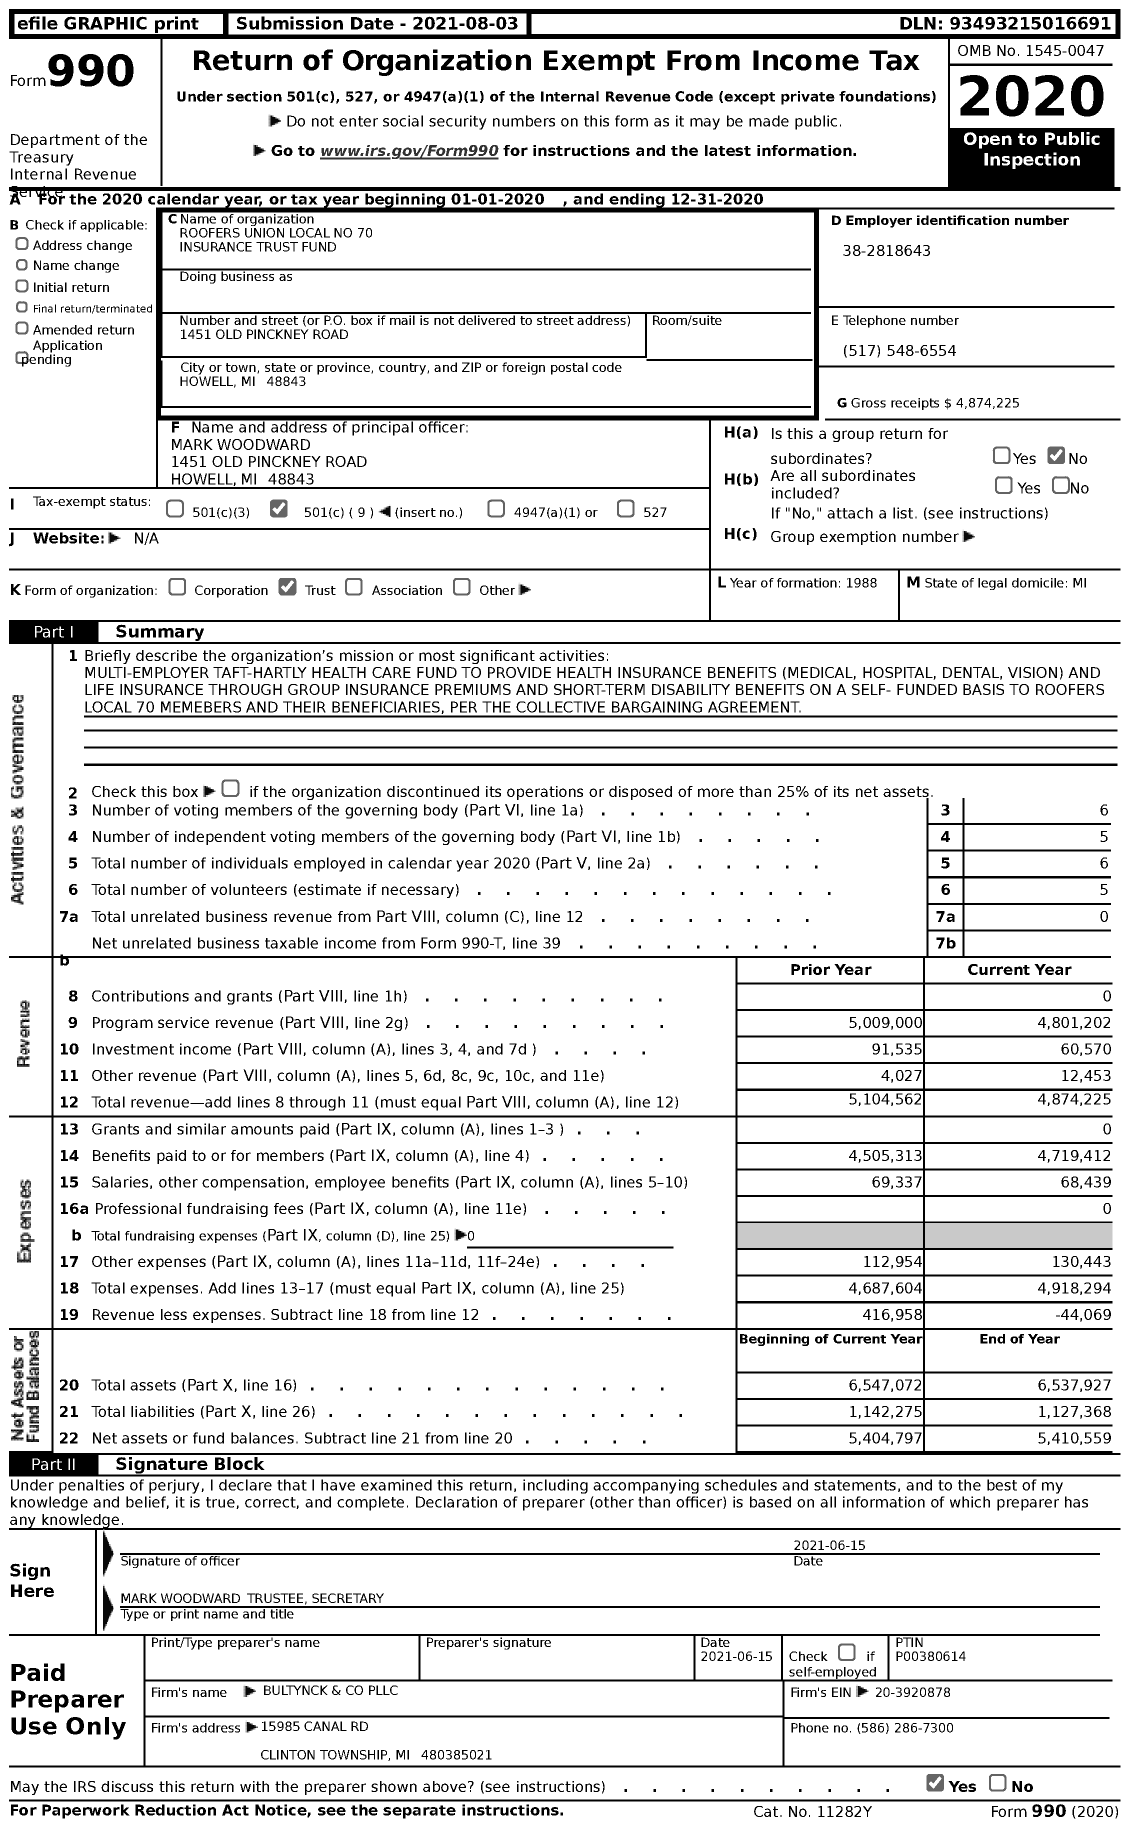 Image of first page of 2020 Form 990 for Roofers Union Local No 70 Insurance Trust Fund